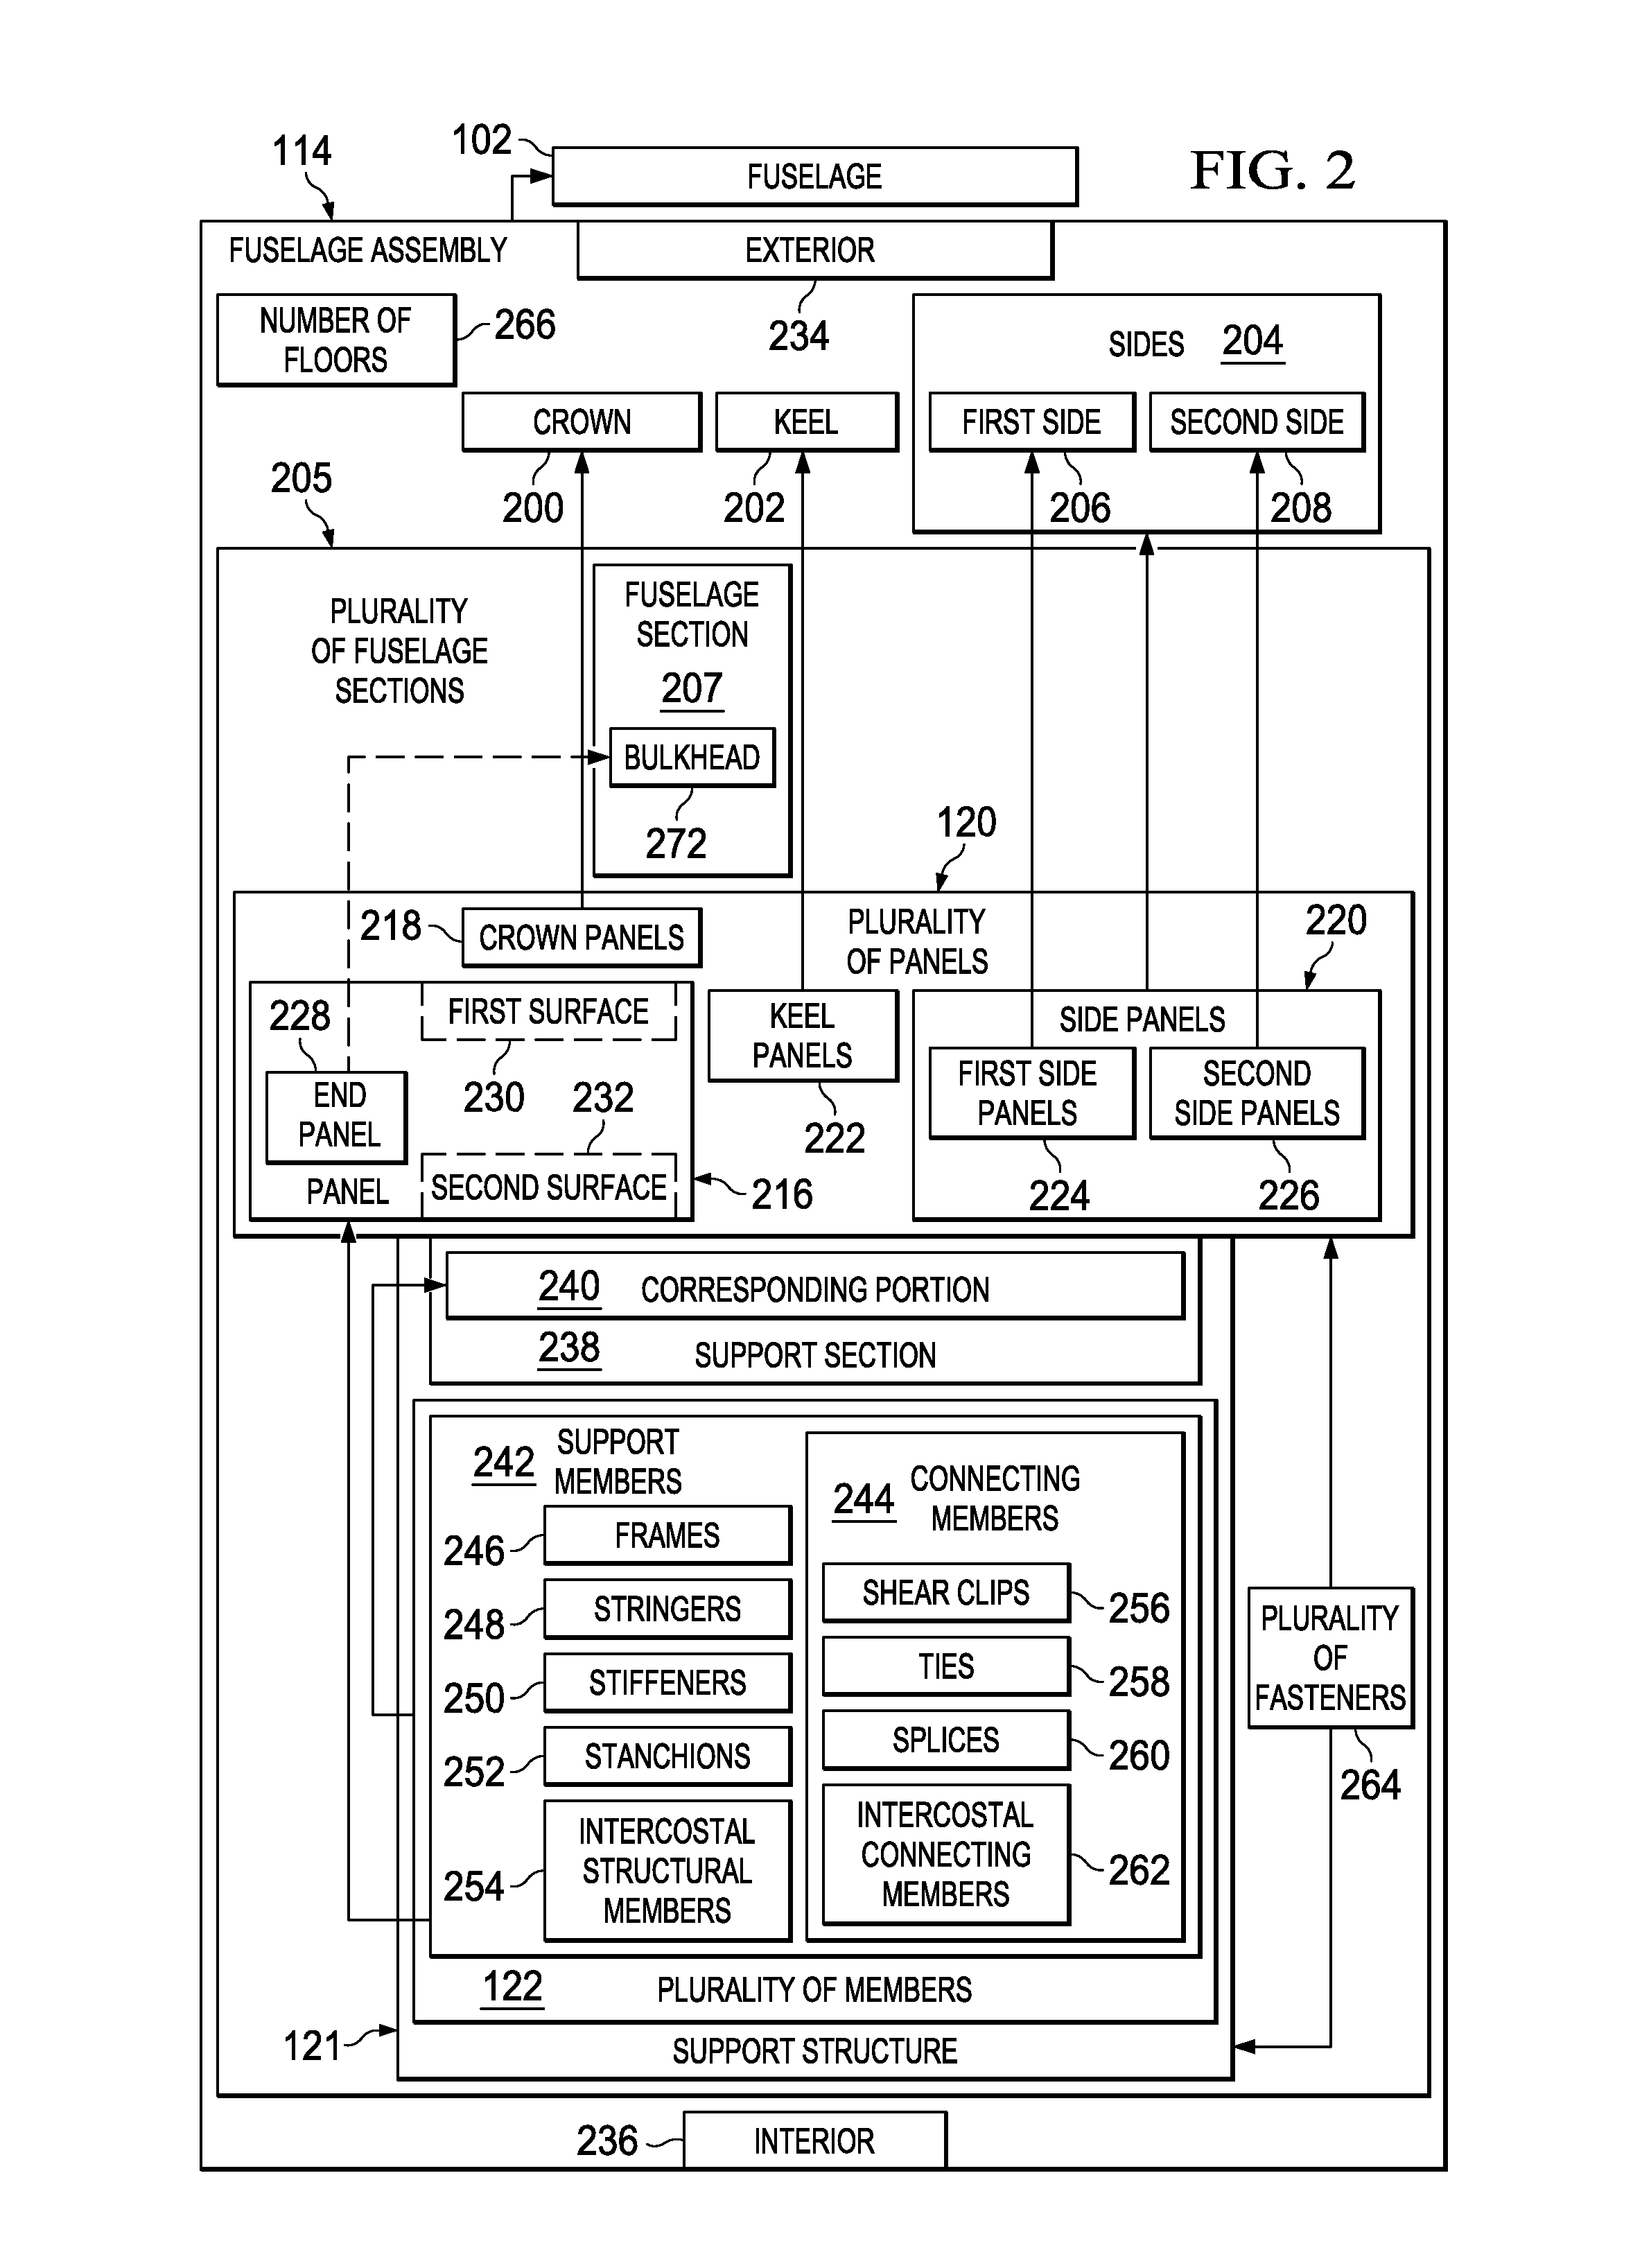 Metrology-Based System for Operating a Flexible Manufacturing System